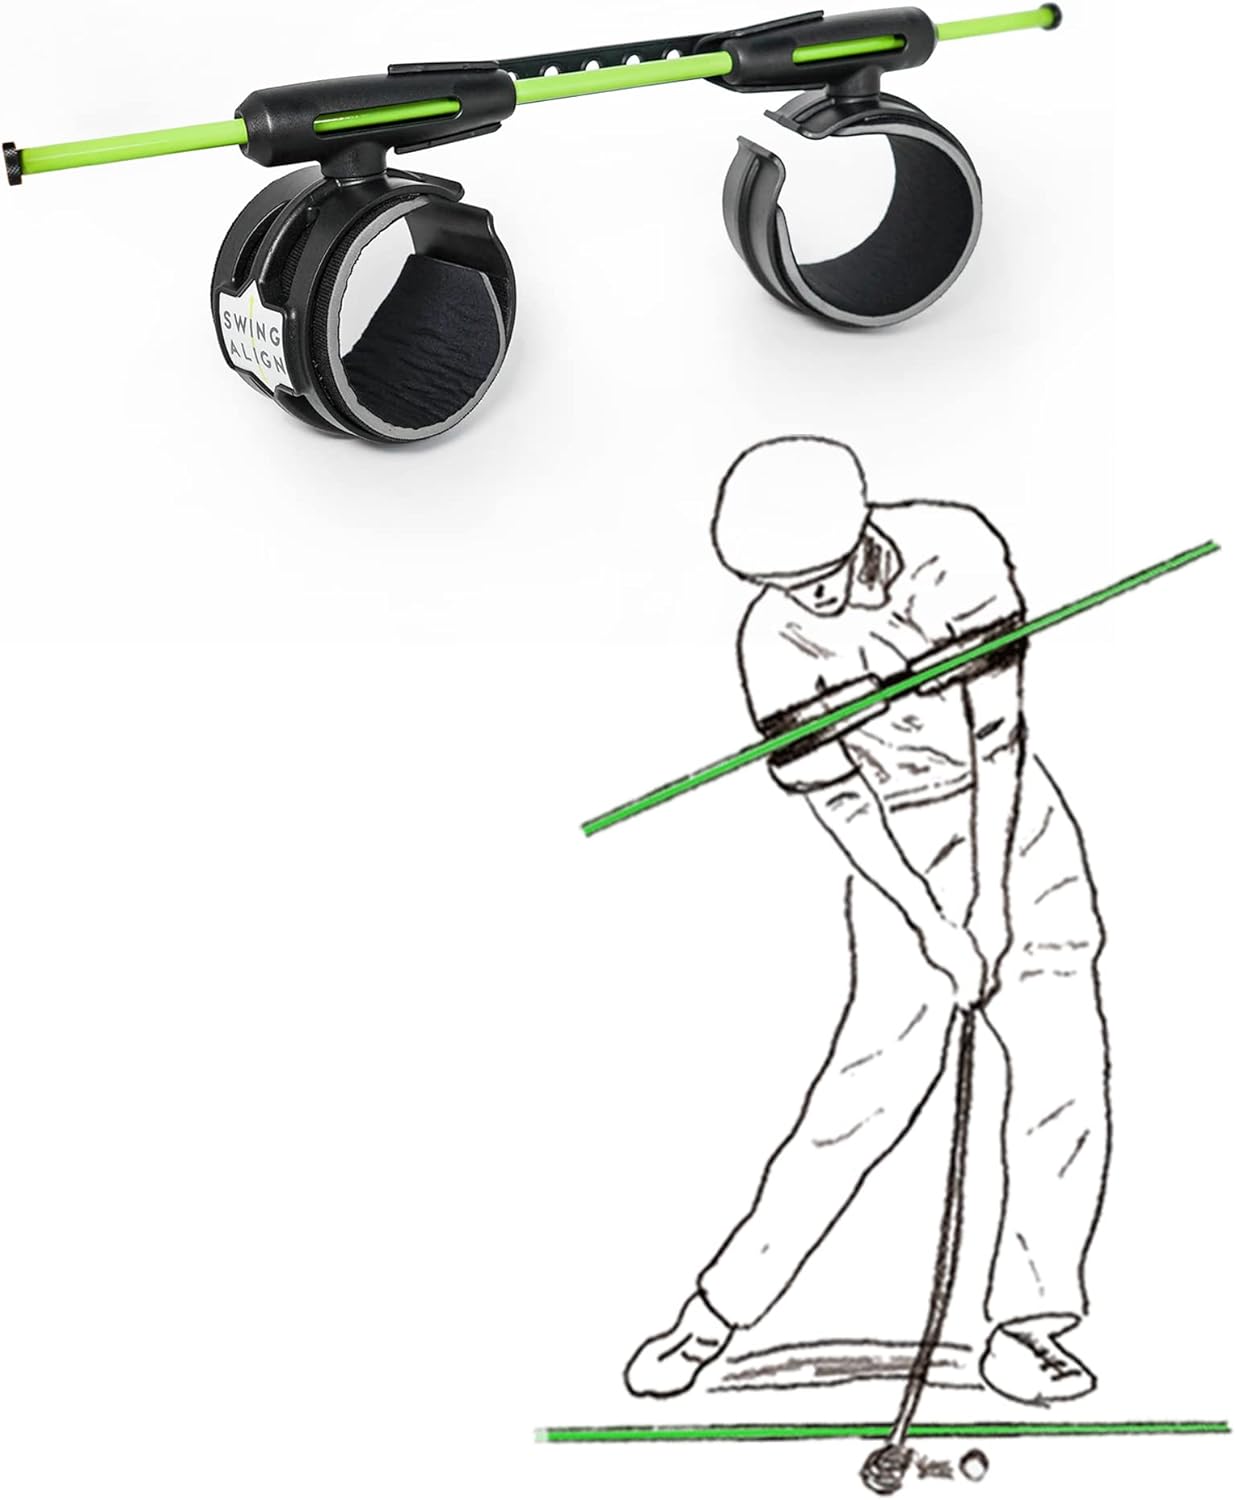 SWINGALIGN Golf Swing Trainer - Swing Align Basic Kit - Golf Training Aids for Fast, Guaranteed Improvement. More Distance and Accuracy. Improves Alignment, Connection, Rotation. Fits Most Golfers.